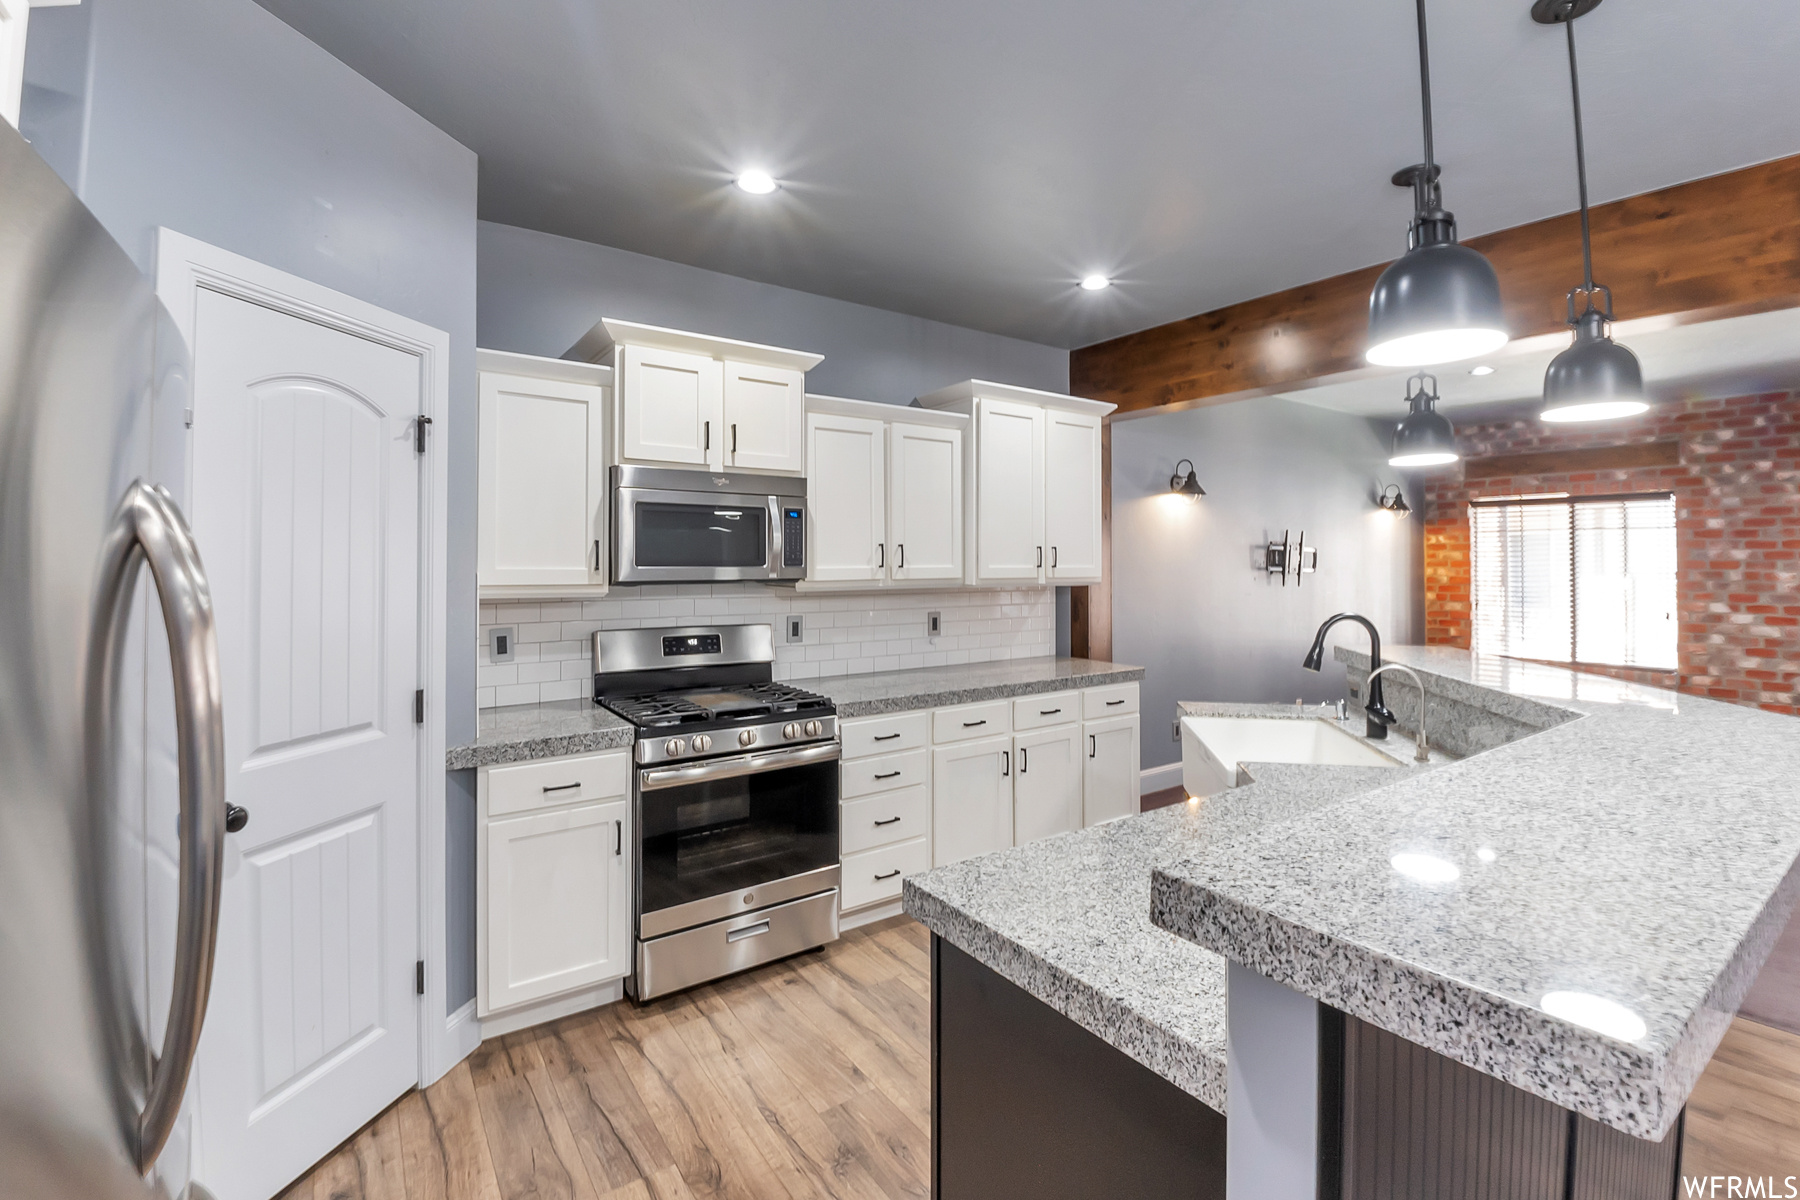 Another view of kitchen with light hardwood flooring, backsplash, beamed ceiling, decorative light fixtures, granite countertops, white cabinetry, appliances with stainless steel finishes, and brick wall